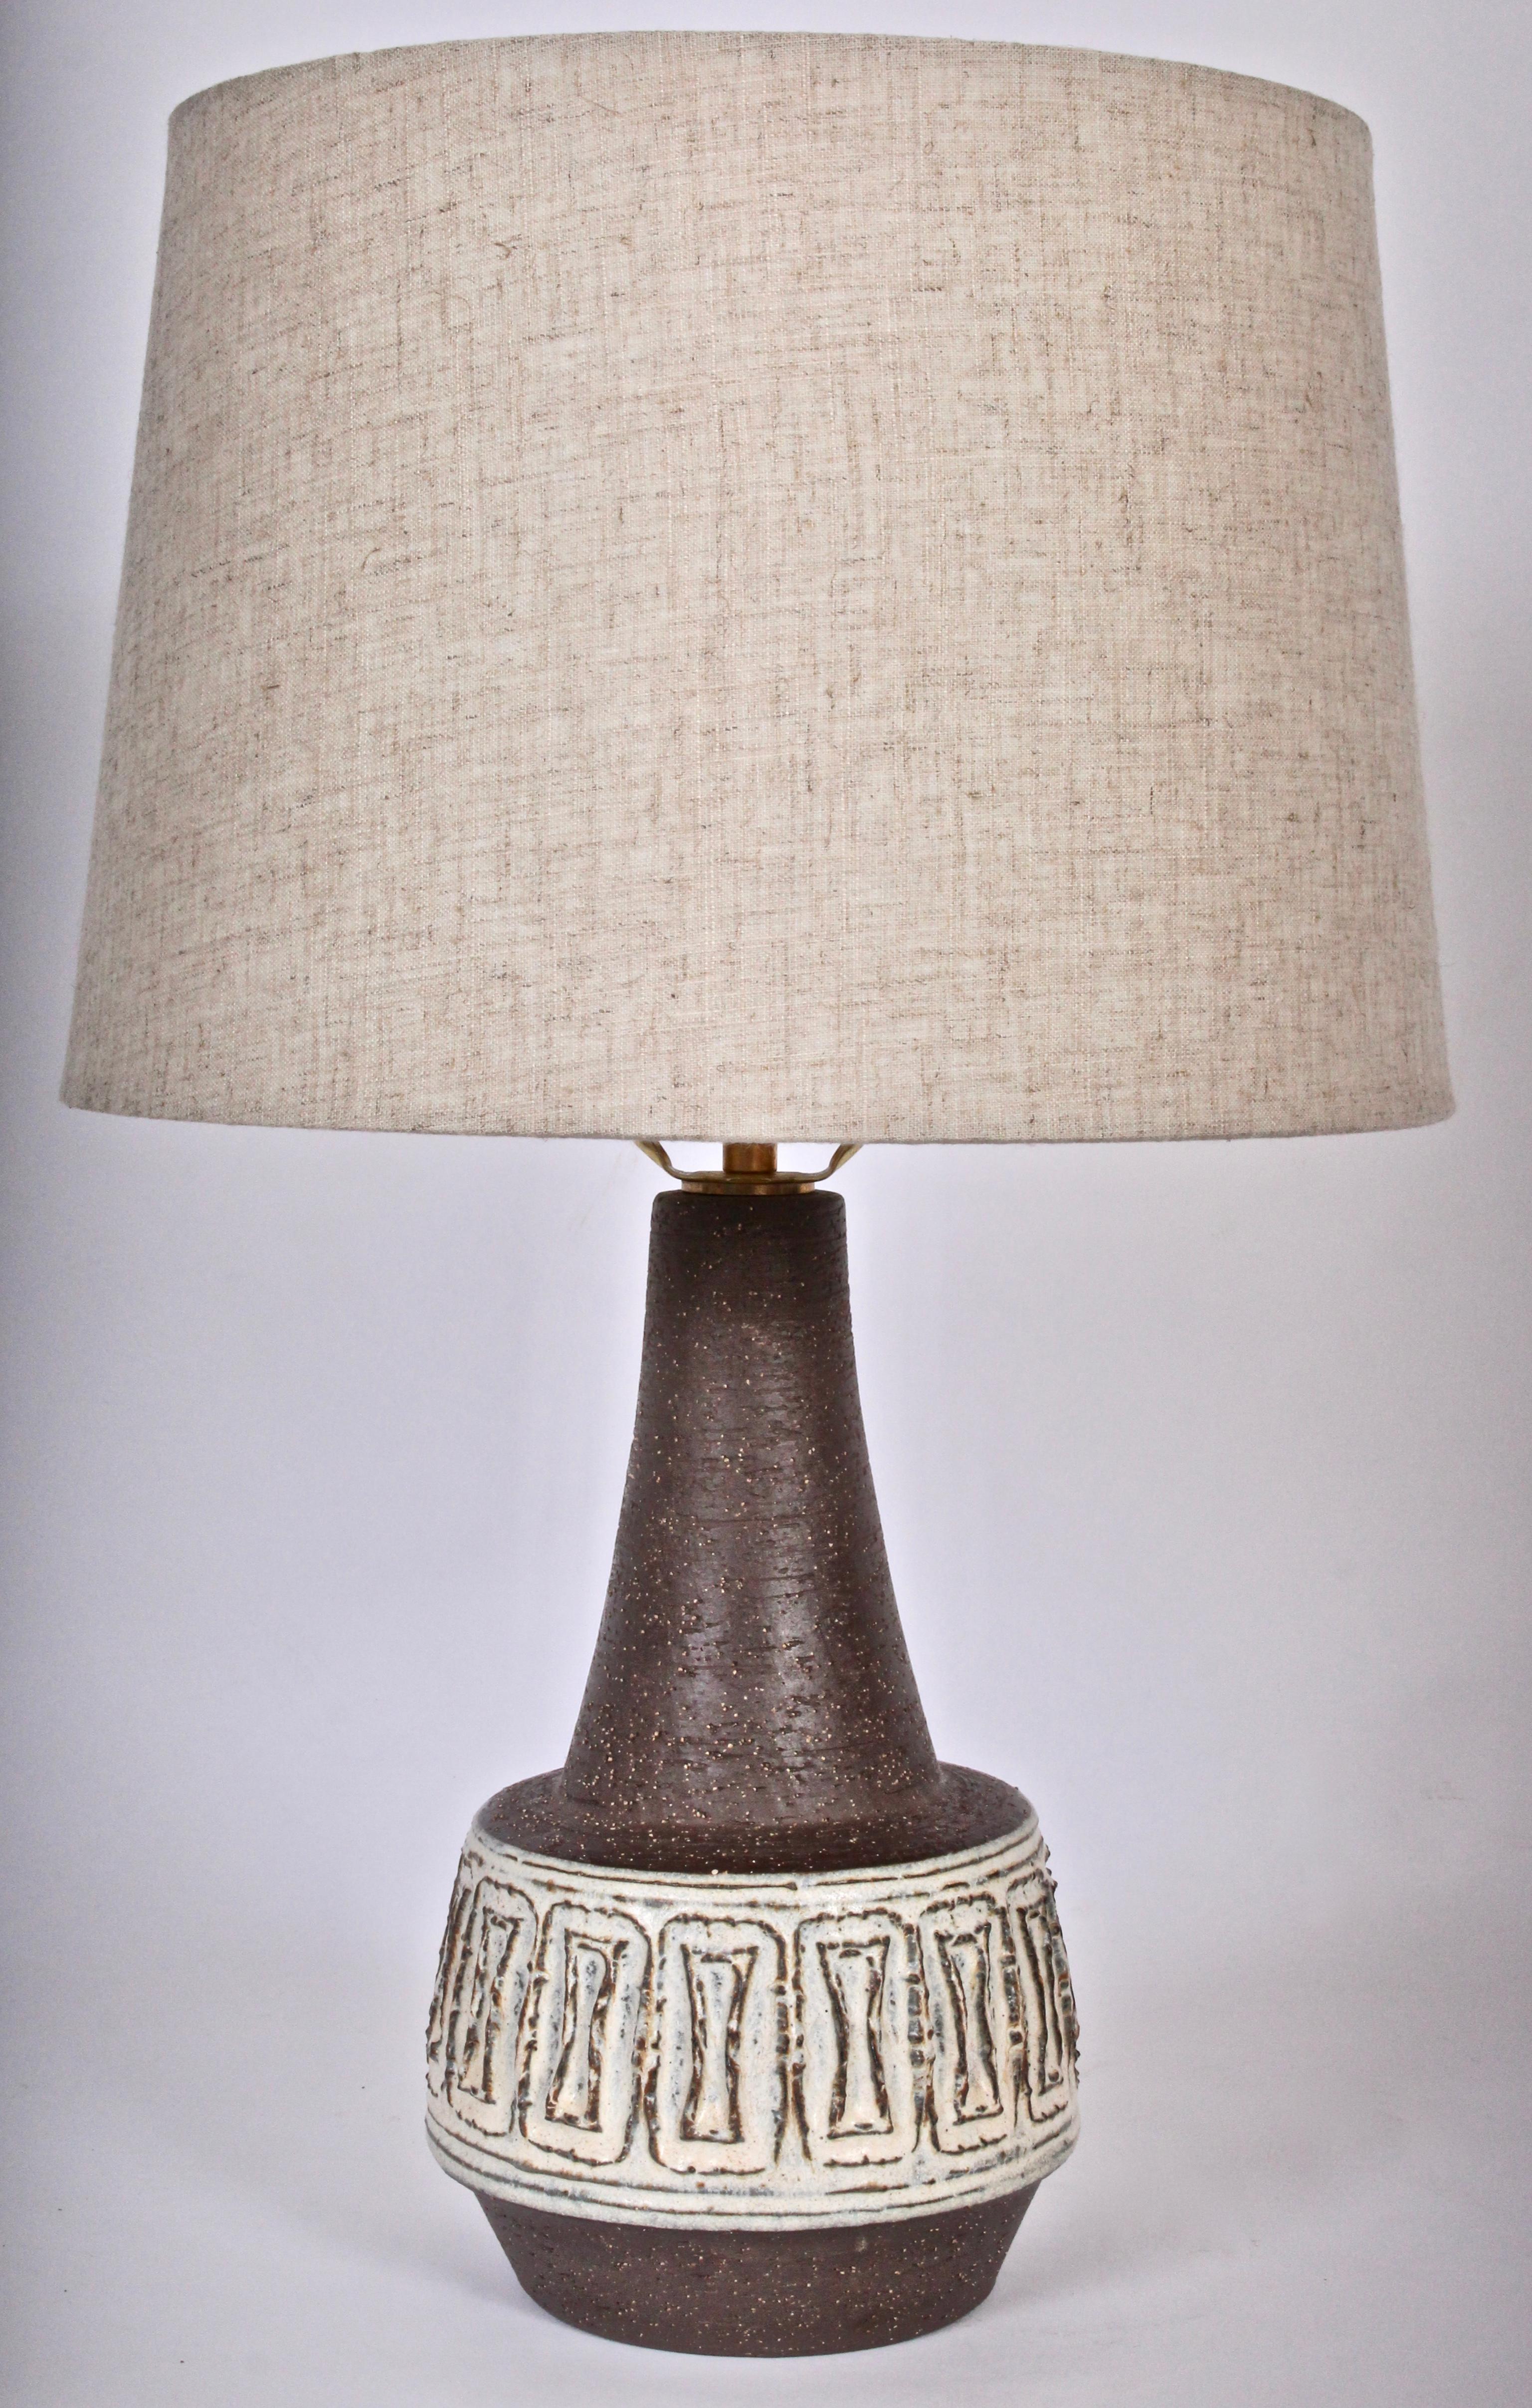 Stoneware Michael Andersen & Son Bornholm Brown & Off White Pottery Table Lamp, 1960s For Sale